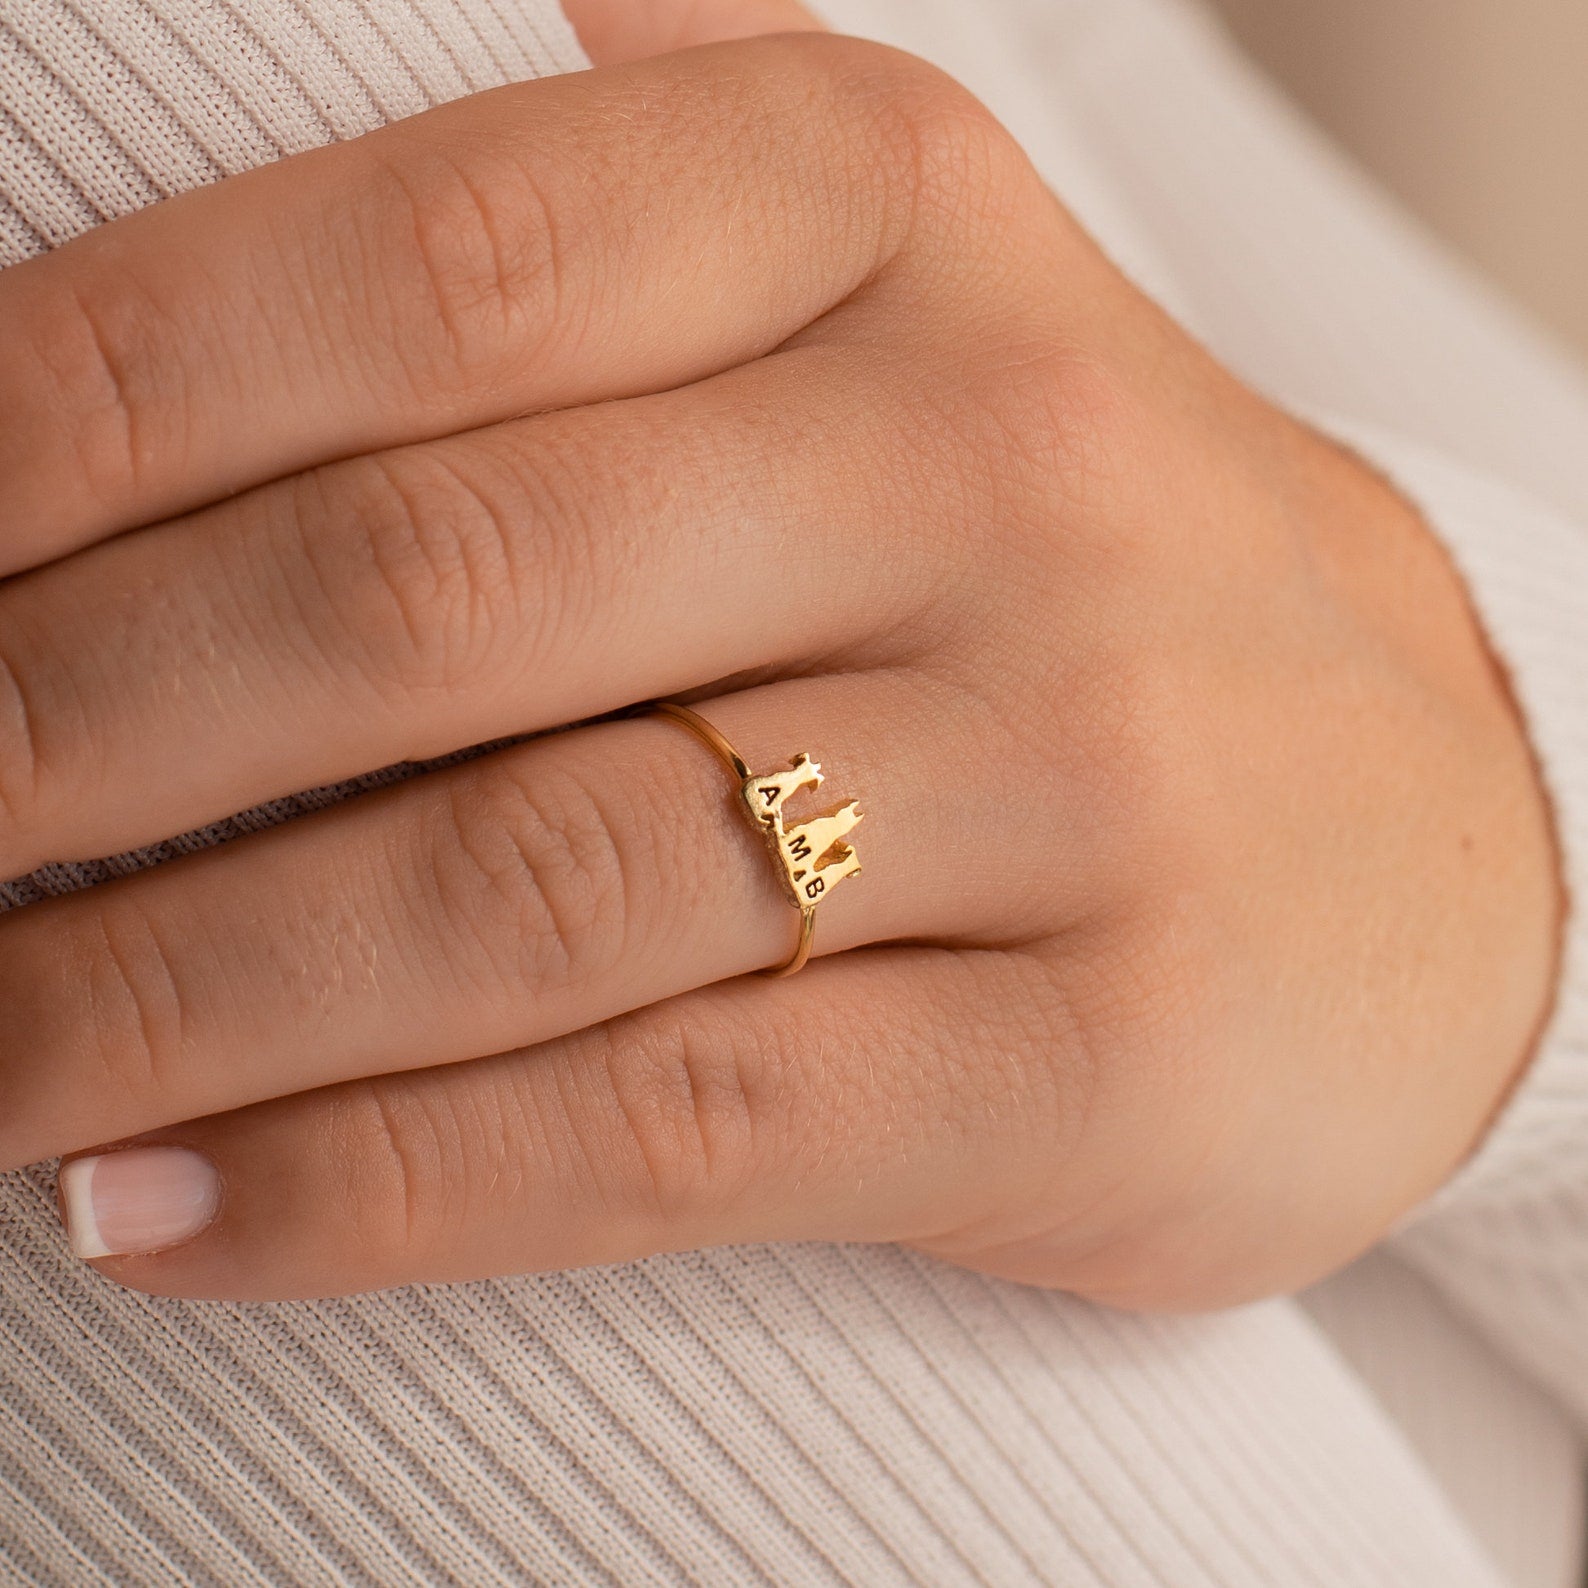 Caitlyn Minimalist Personalized Pet Ring